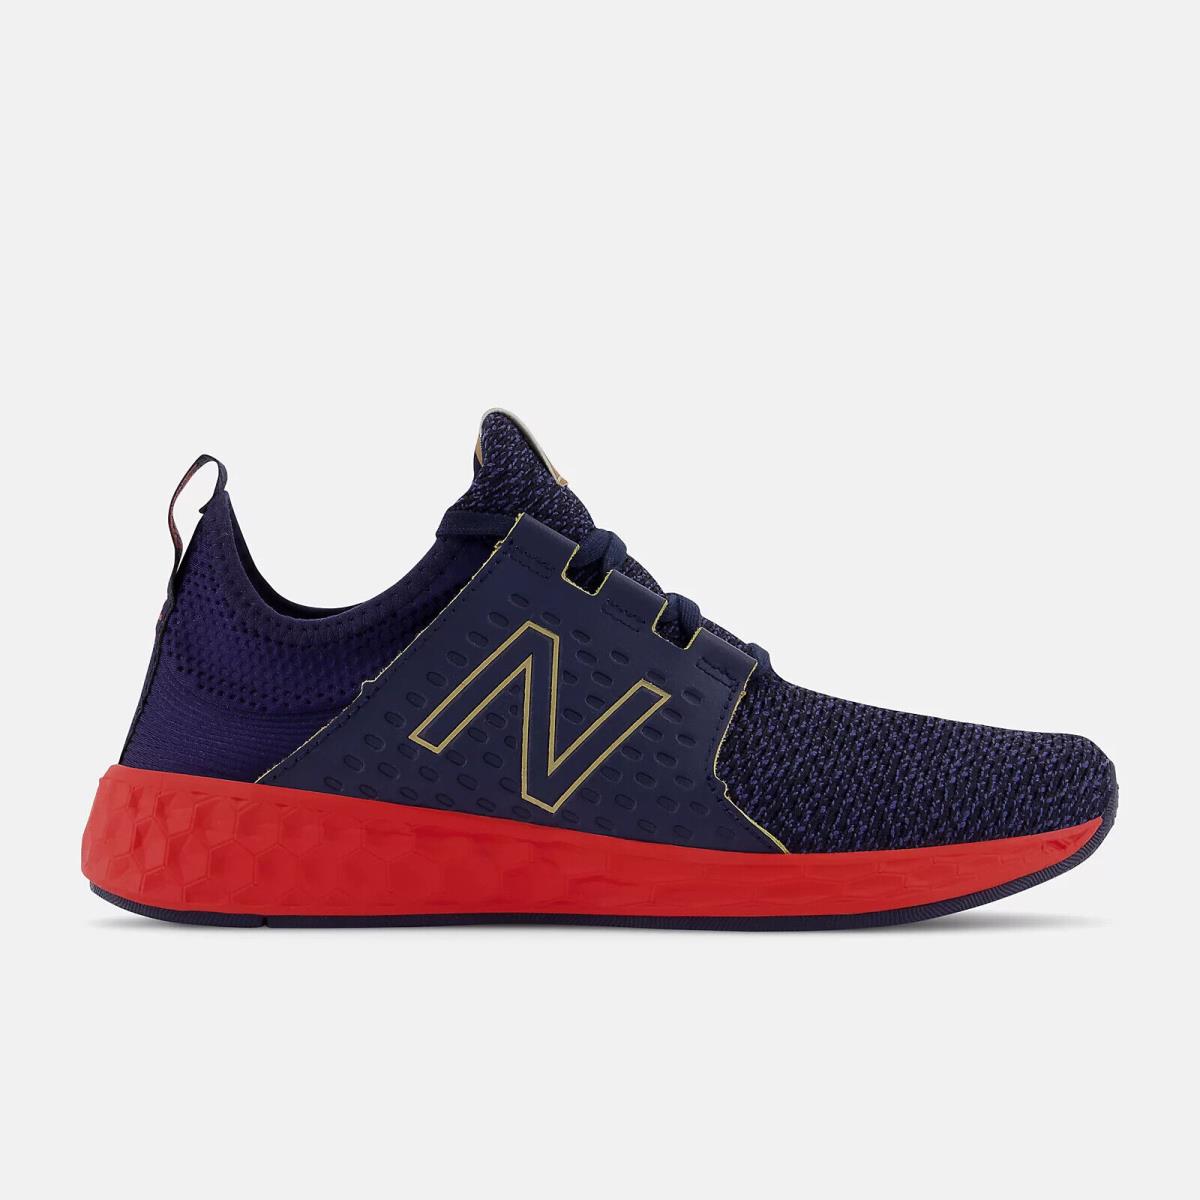 New Balance shoes  - Team Navy Neo Flame 1